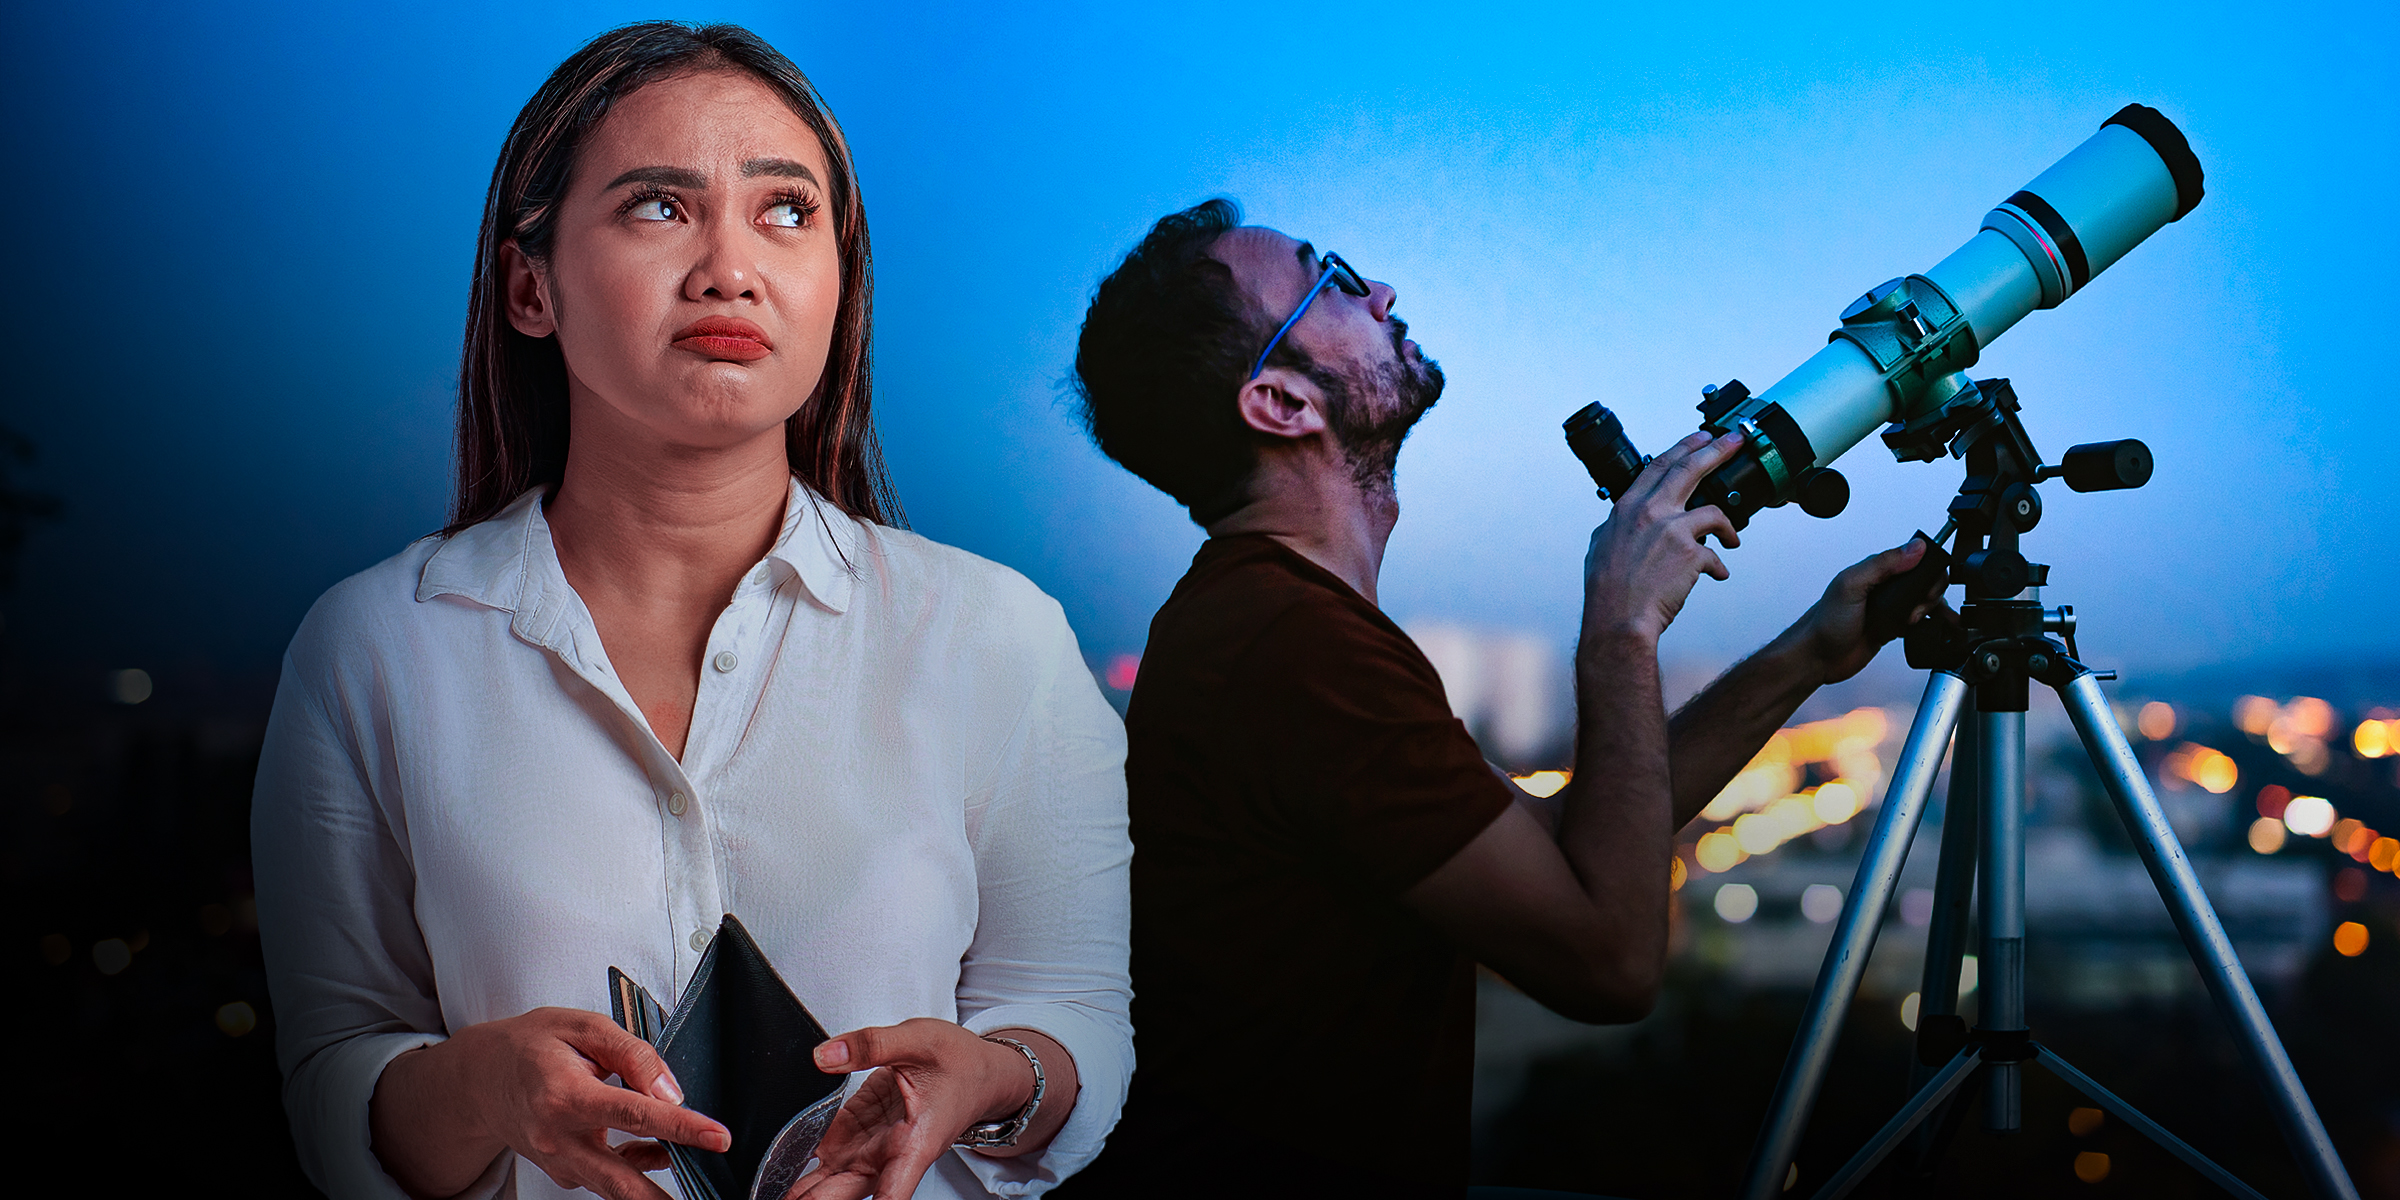 An unhappy woman pictured with a man in the background using a telescope | Source: Shutterstock